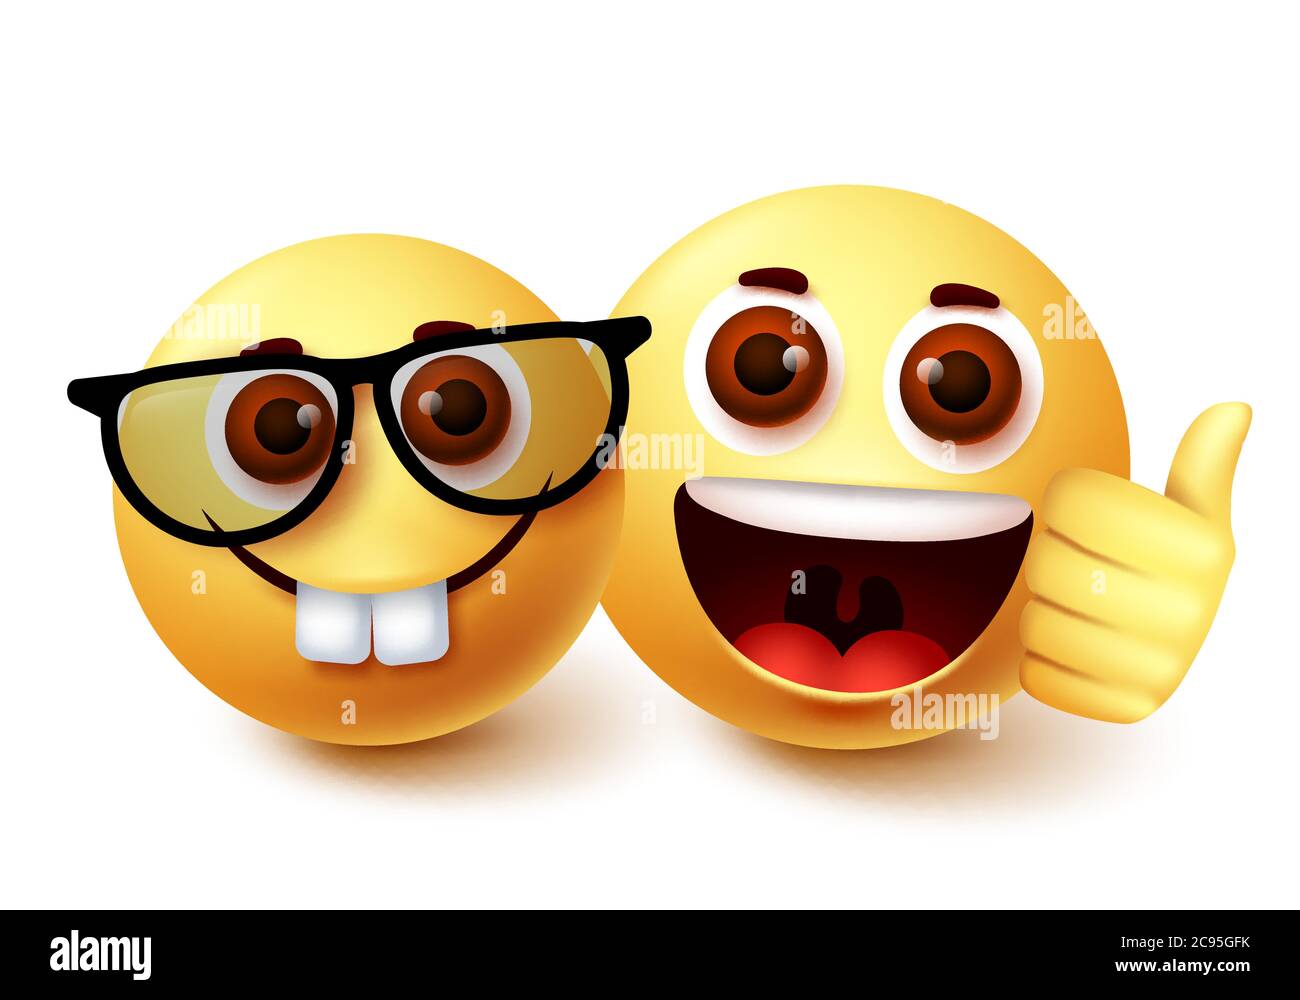 Smiley emoji of nerd friend vector character design. Clever weird emoji with presence of friend with happy facial expressions and thumbs up Stock Vector